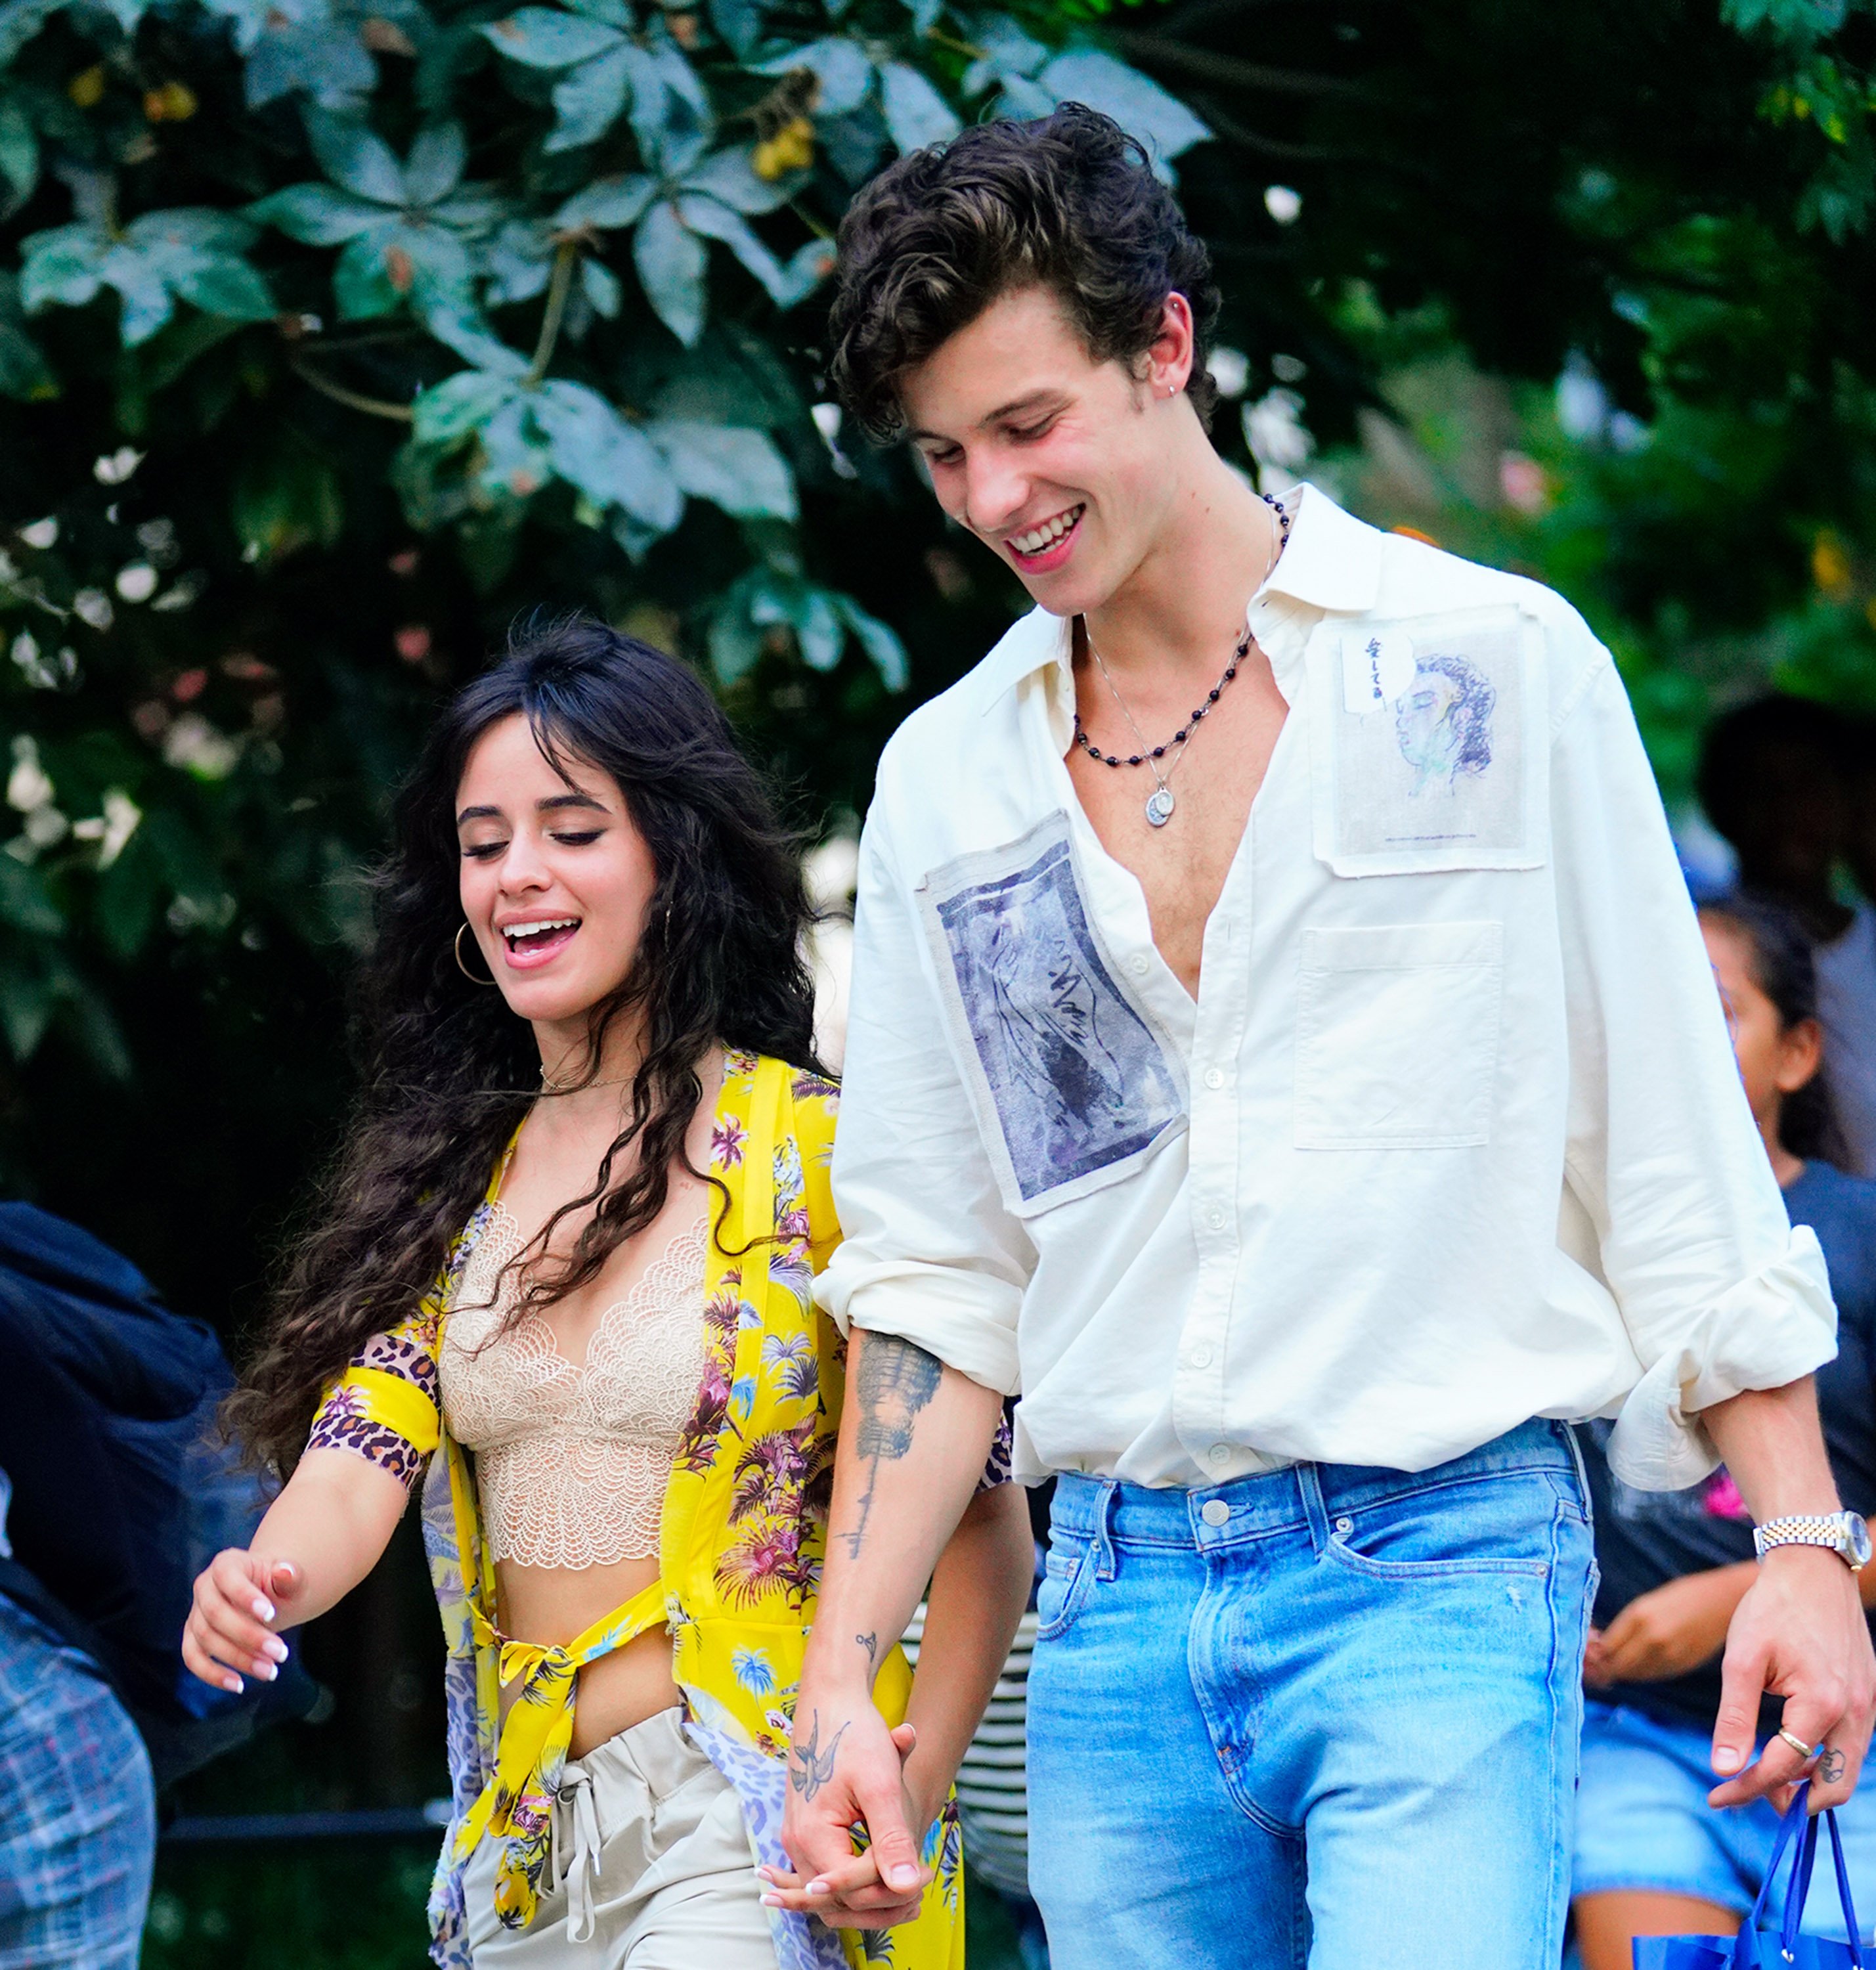 Camila Cabello and Shawn Mendes spotted on August 8, 2019 in New York. | Source: Getty Images